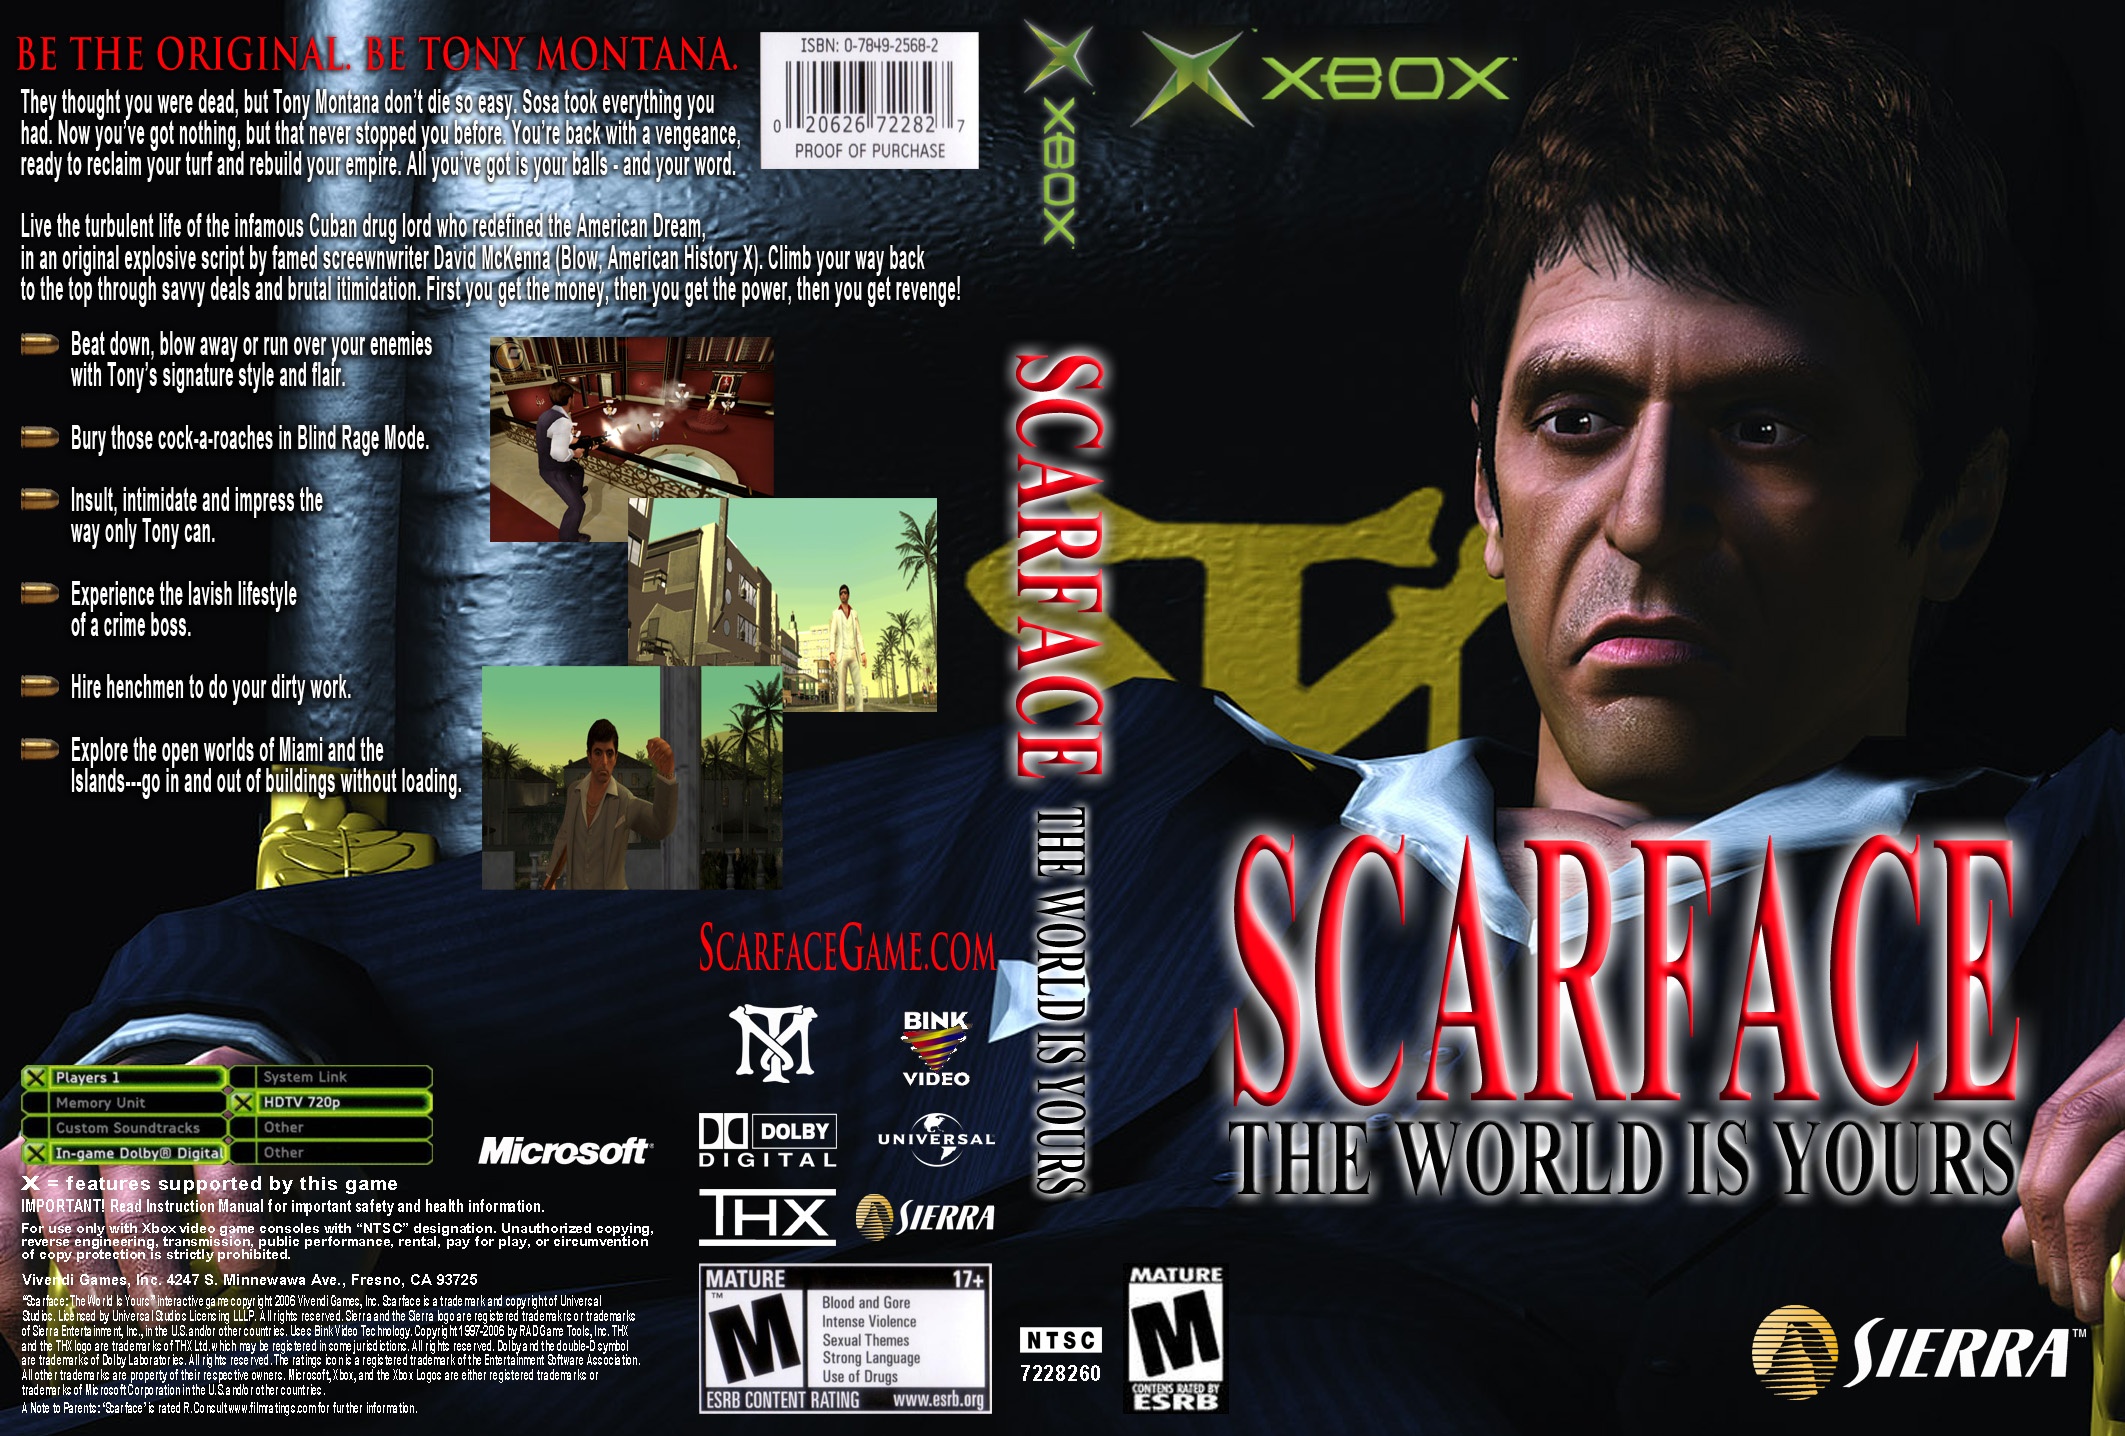 Scarface, The World is Yours full album zip